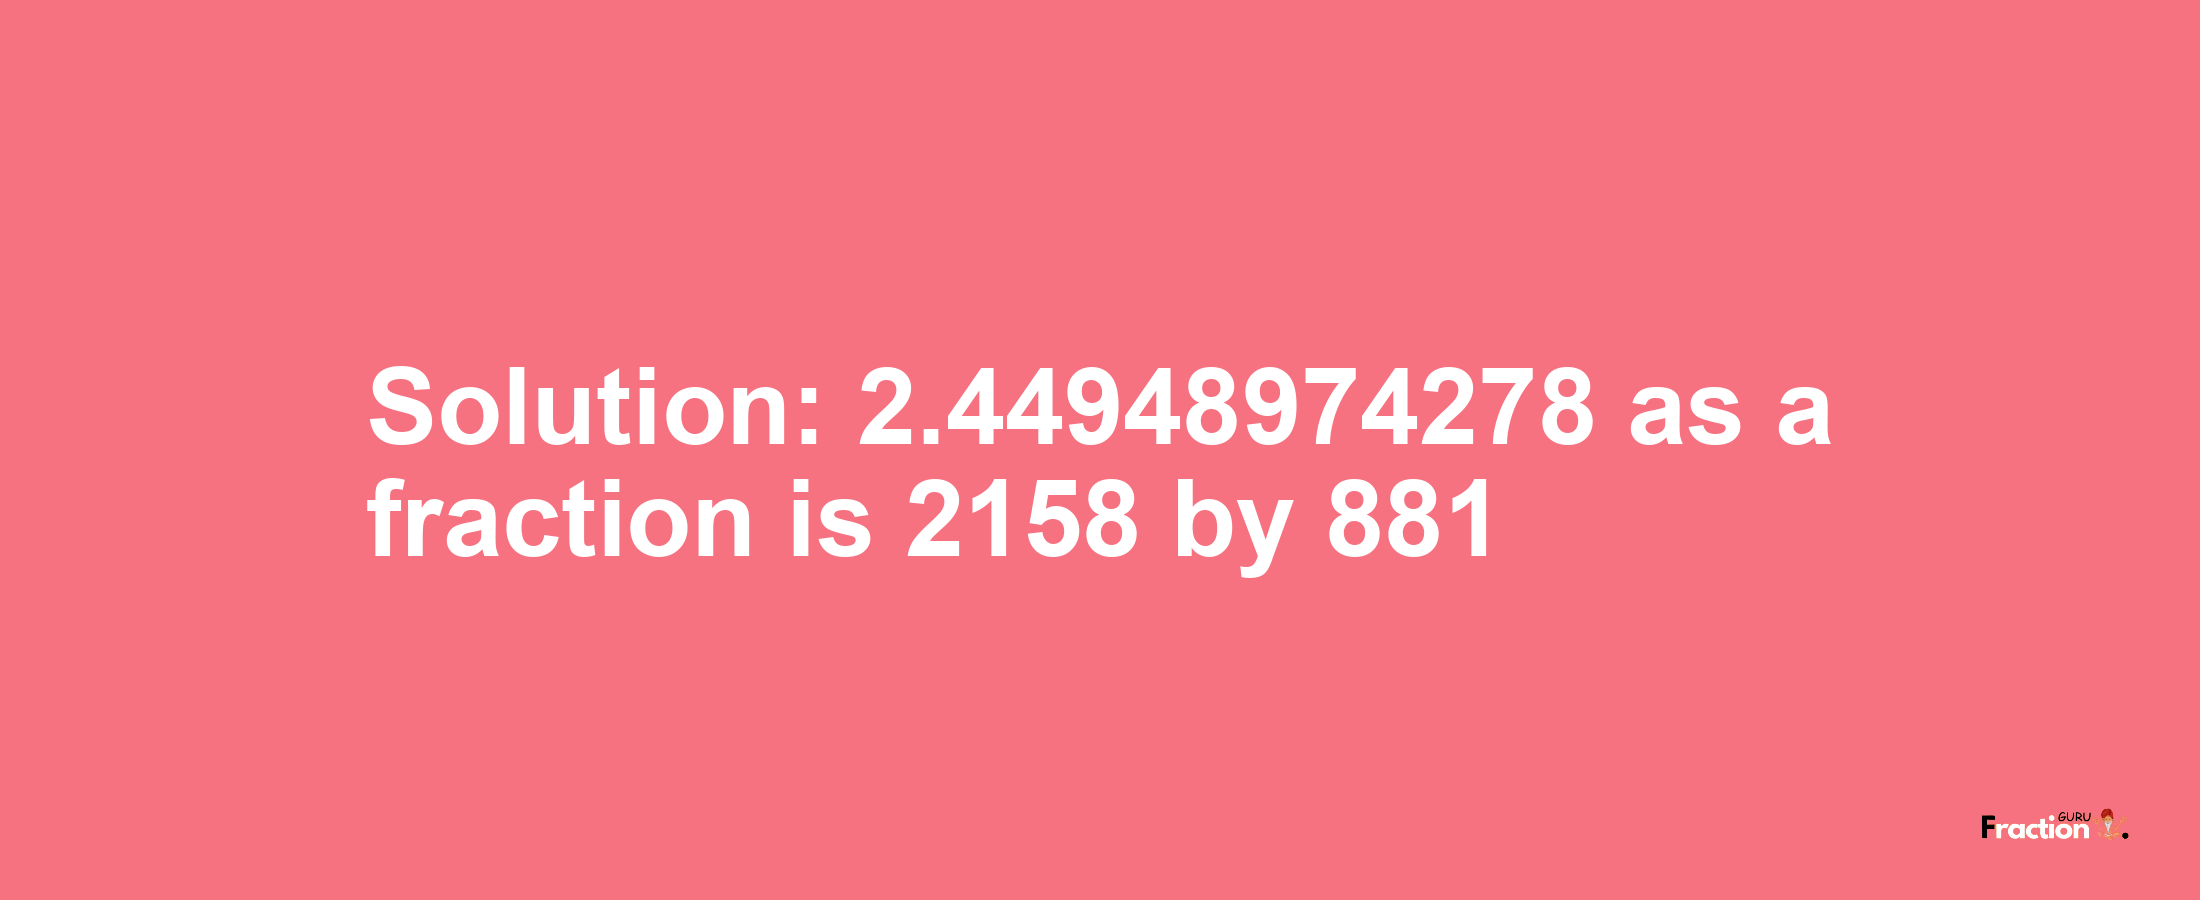 Solution:2.44948974278 as a fraction is 2158/881